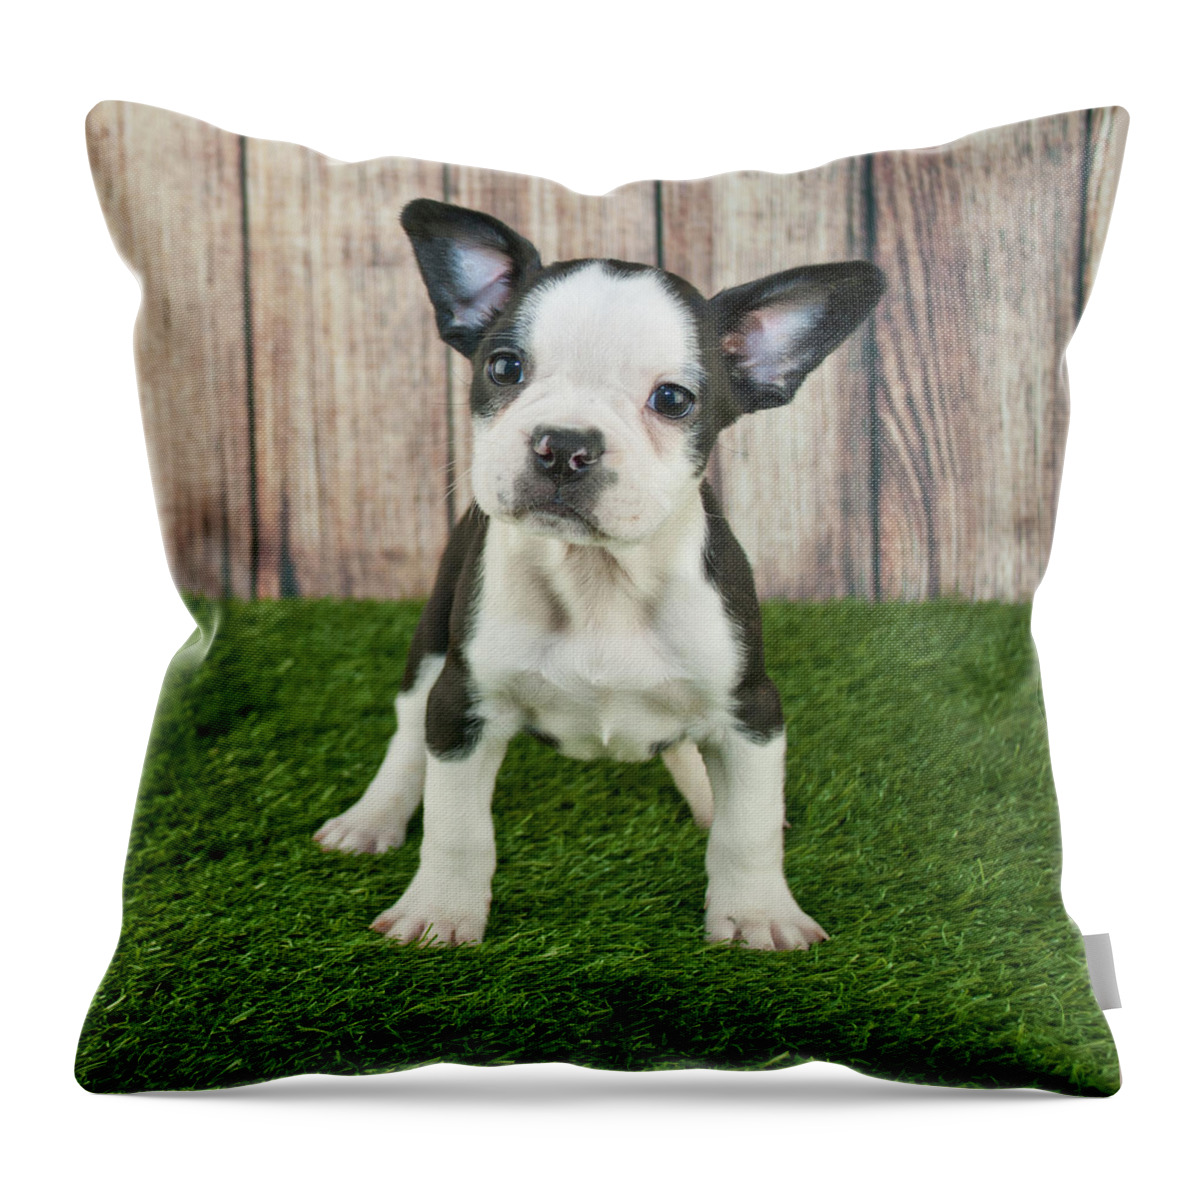 Pets Throw Pillow featuring the photograph Frenchton Puppy by Stockimage